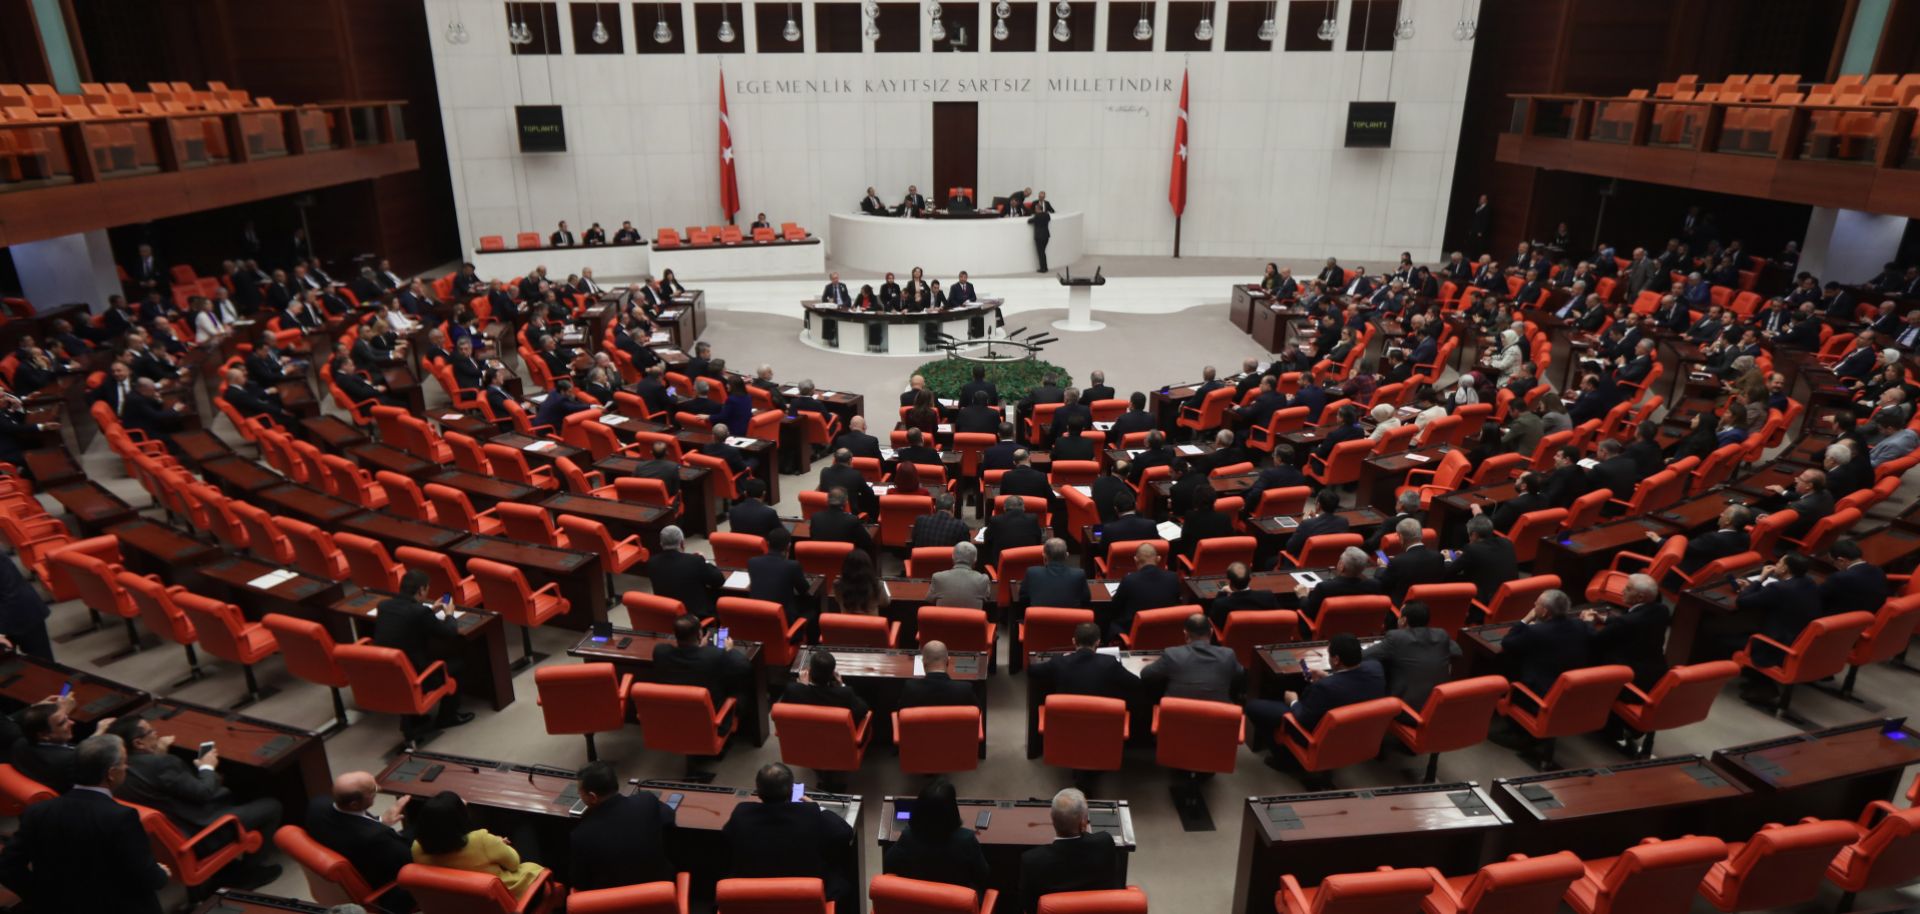 Members of Turkey's parliament pass legislation approving a deployment of Turkish troops to Libya on Jan. 2, 2020.